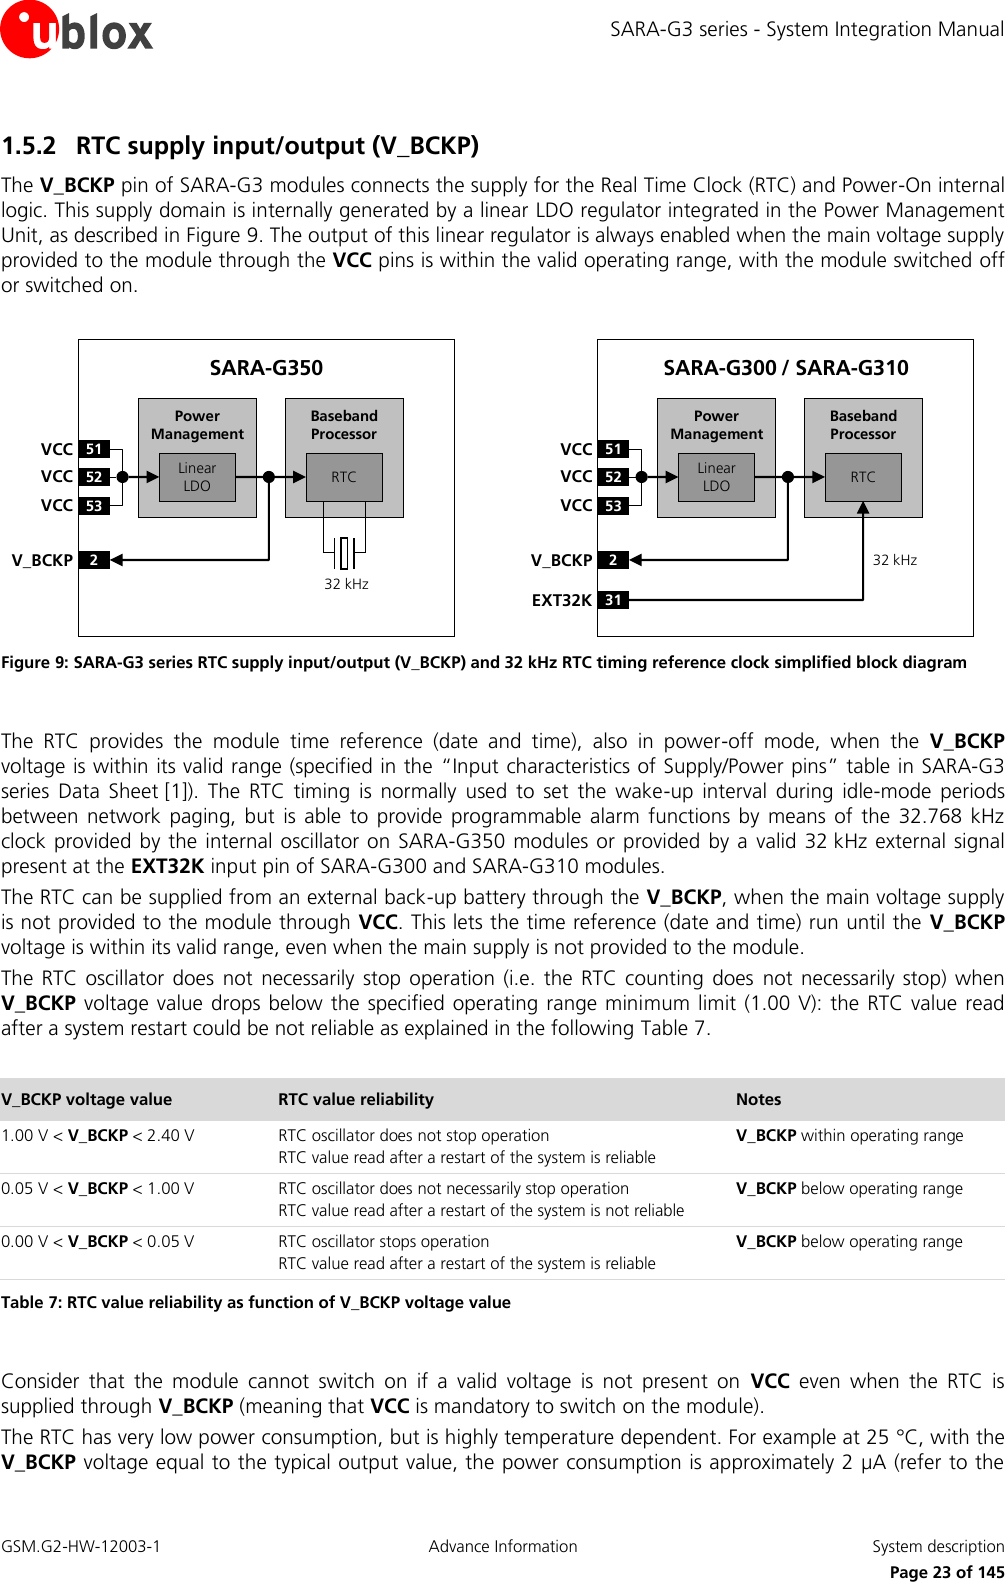 SARA-G3 series - System Integration Manual GSM.G2-HW-12003-1  Advance Information  System description     Page 23 of 145 1.5.2 RTC supply input/output (V_BCKP) The V_BCKP pin of SARA-G3 modules connects the supply for the Real Time Clock (RTC) and Power-On internal logic. This supply domain is internally generated by a linear LDO regulator integrated in the Power Management Unit, as described in Figure 9. The output of this linear regulator is always enabled when the main voltage supply provided to the module through the VCC pins is within the valid operating range, with the module switched off or switched on.  Baseband Processor51VCC52VCC53VCC2V_BCKPLinear LDO RTCPower ManagementSARA-G35032 kHzBaseband Processor51VCC52VCC53VCC2V_BCKPLinear LDO RTCPower ManagementSARA-G300 / SARA-G31032 kHz31EXT32K Figure 9: SARA-G3 series RTC supply input/output (V_BCKP) and 32 kHz RTC timing reference clock simplified block diagram  The  RTC  provides  the  module  time  reference  (date  and  time),  also  in  power-off  mode,  when  the  V_BCKP voltage is within its valid range (specified in the  “Input characteristics of Supply/Power pins” table in SARA-G3 series Data  Sheet [1]).  The  RTC  timing  is  normally  used  to  set  the  wake-up  interval  during  idle-mode  periods between  network  paging, but  is  able  to  provide  programmable  alarm  functions  by  means  of  the  32.768  kHz clock provided  by the internal oscillator  on SARA-G350 modules or  provided by a valid  32 kHz external signal present at the EXT32K input pin of SARA-G300 and SARA-G310 modules. The RTC can be supplied from an external back-up battery through the V_BCKP, when the main voltage supply is not provided to the module through VCC. This lets the time reference (date and time) run until the  V_BCKP voltage is within its valid range, even when the main supply is not provided to the module. The  RTC  oscillator  does  not  necessarily  stop  operation (i.e.  the  RTC  counting  does  not  necessarily stop)  when V_BCKP voltage  value drops below the specified operating range  minimum limit  (1.00 V): the  RTC value read after a system restart could be not reliable as explained in the following Table 7.  V_BCKP voltage value RTC value reliability Notes 1.00 V &lt; V_BCKP &lt; 2.40 V RTC oscillator does not stop operation RTC value read after a restart of the system is reliable V_BCKP within operating range 0.05 V &lt; V_BCKP &lt; 1.00 V RTC oscillator does not necessarily stop operation RTC value read after a restart of the system is not reliable V_BCKP below operating range 0.00 V &lt; V_BCKP &lt; 0.05 V RTC oscillator stops operation RTC value read after a restart of the system is reliable V_BCKP below operating range Table 7: RTC value reliability as function of V_BCKP voltage value   Consider  that  the  module  cannot  switch  on  if  a  valid  voltage  is  not  present  on  VCC  even  when  the  RTC  is supplied through V_BCKP (meaning that VCC is mandatory to switch on the module). The RTC has very low power consumption, but is highly temperature dependent. For example at 25 °C, with the V_BCKP voltage equal to the typical output value, the power consumption is approximately 2 µA (refer to the 